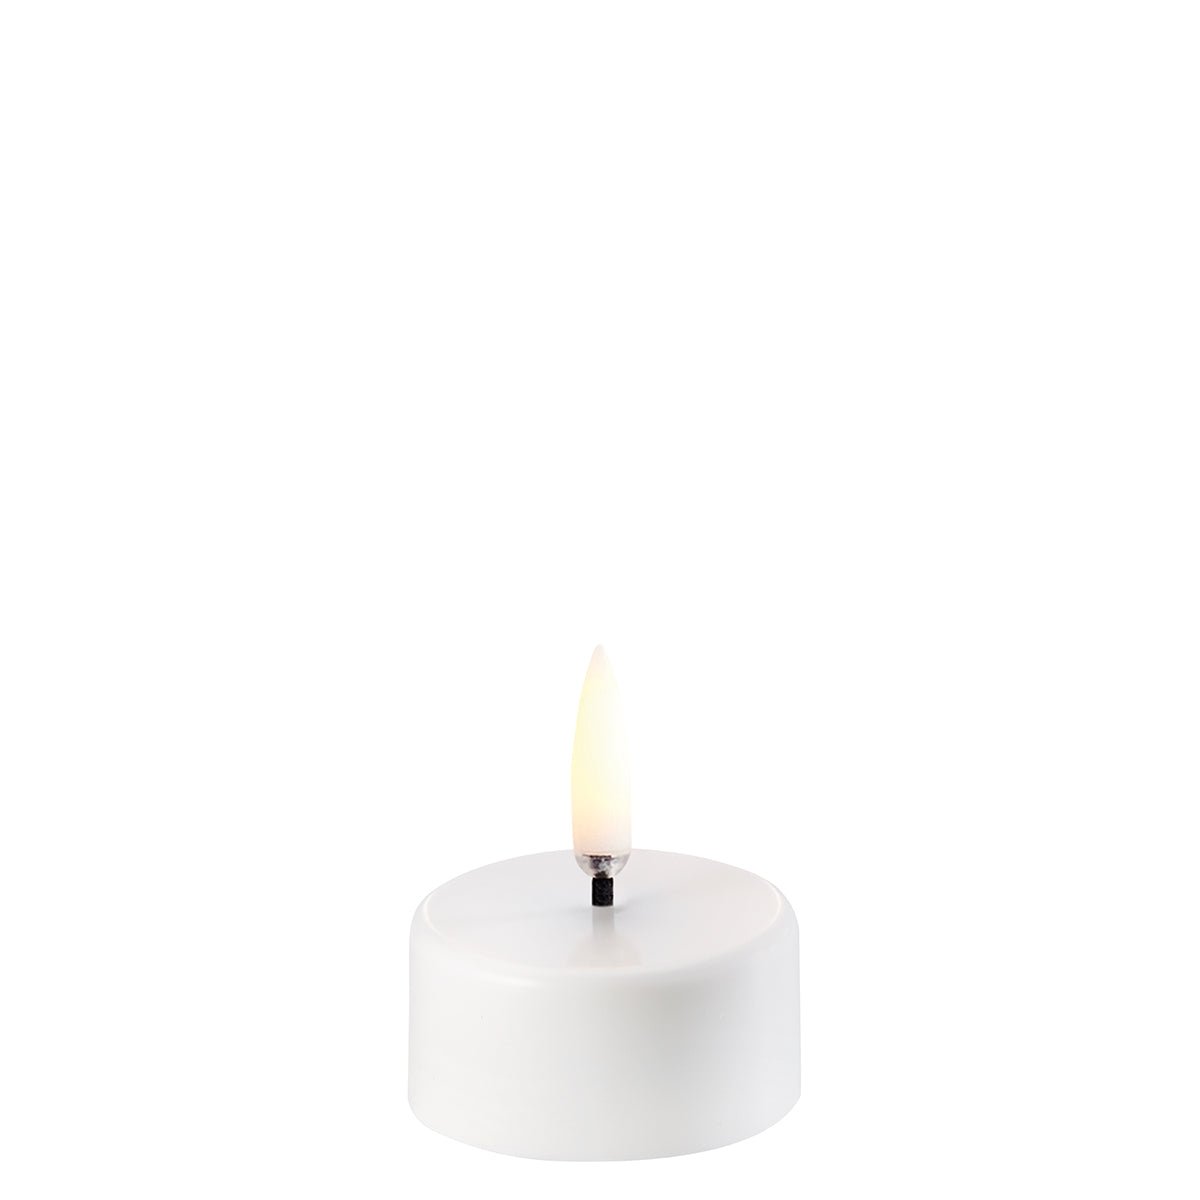 Eledea Tealight Candle - Set the Perfect Ambiance with LED